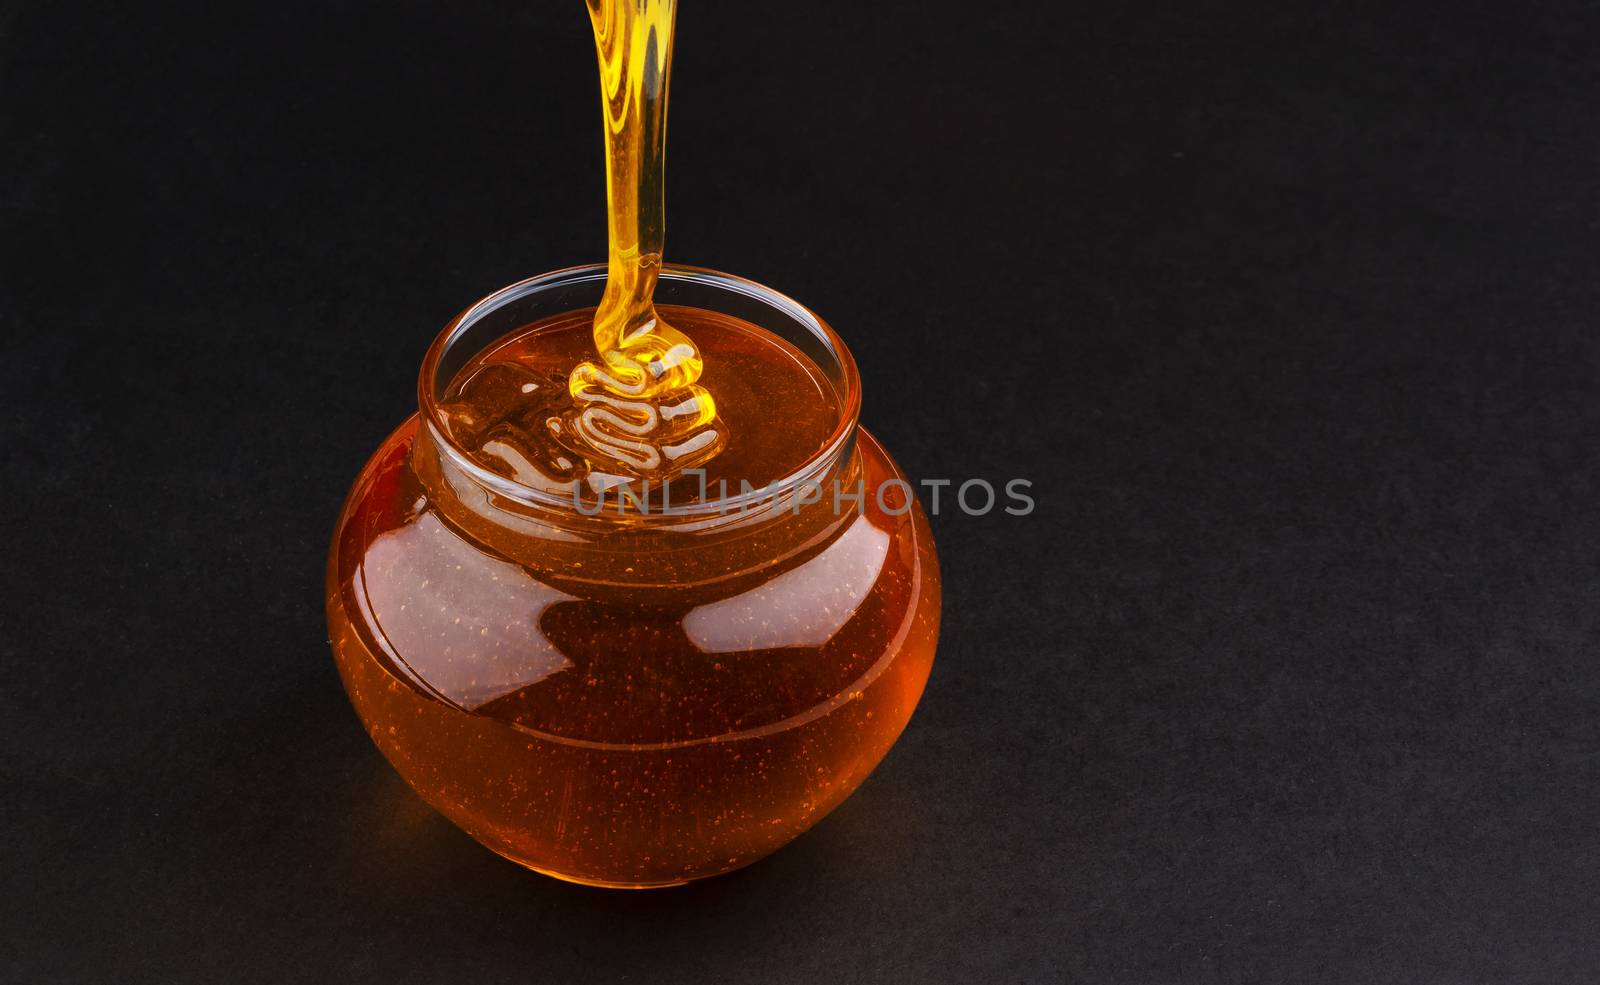 Pot of pouring honey on black background with copy space by xamtiw